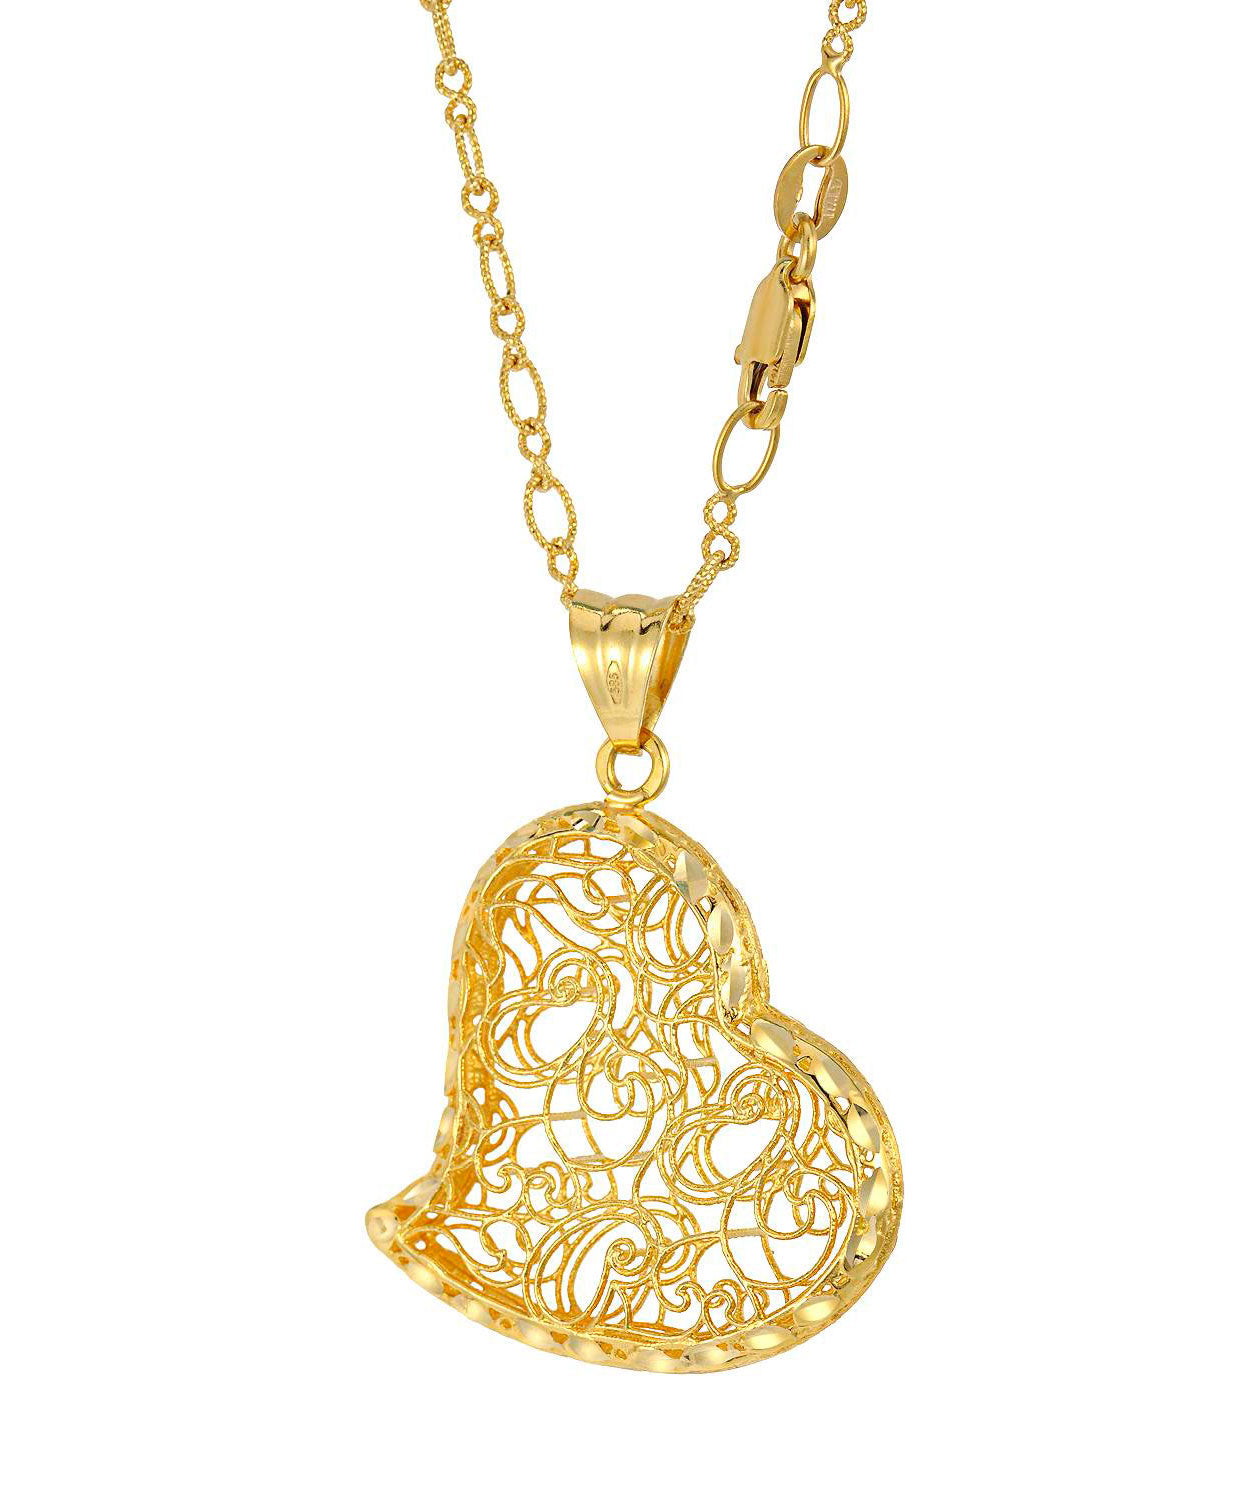 Patterns of Love Collection 14k Gold Heart Pendant With Chain - Made in Italy View 2